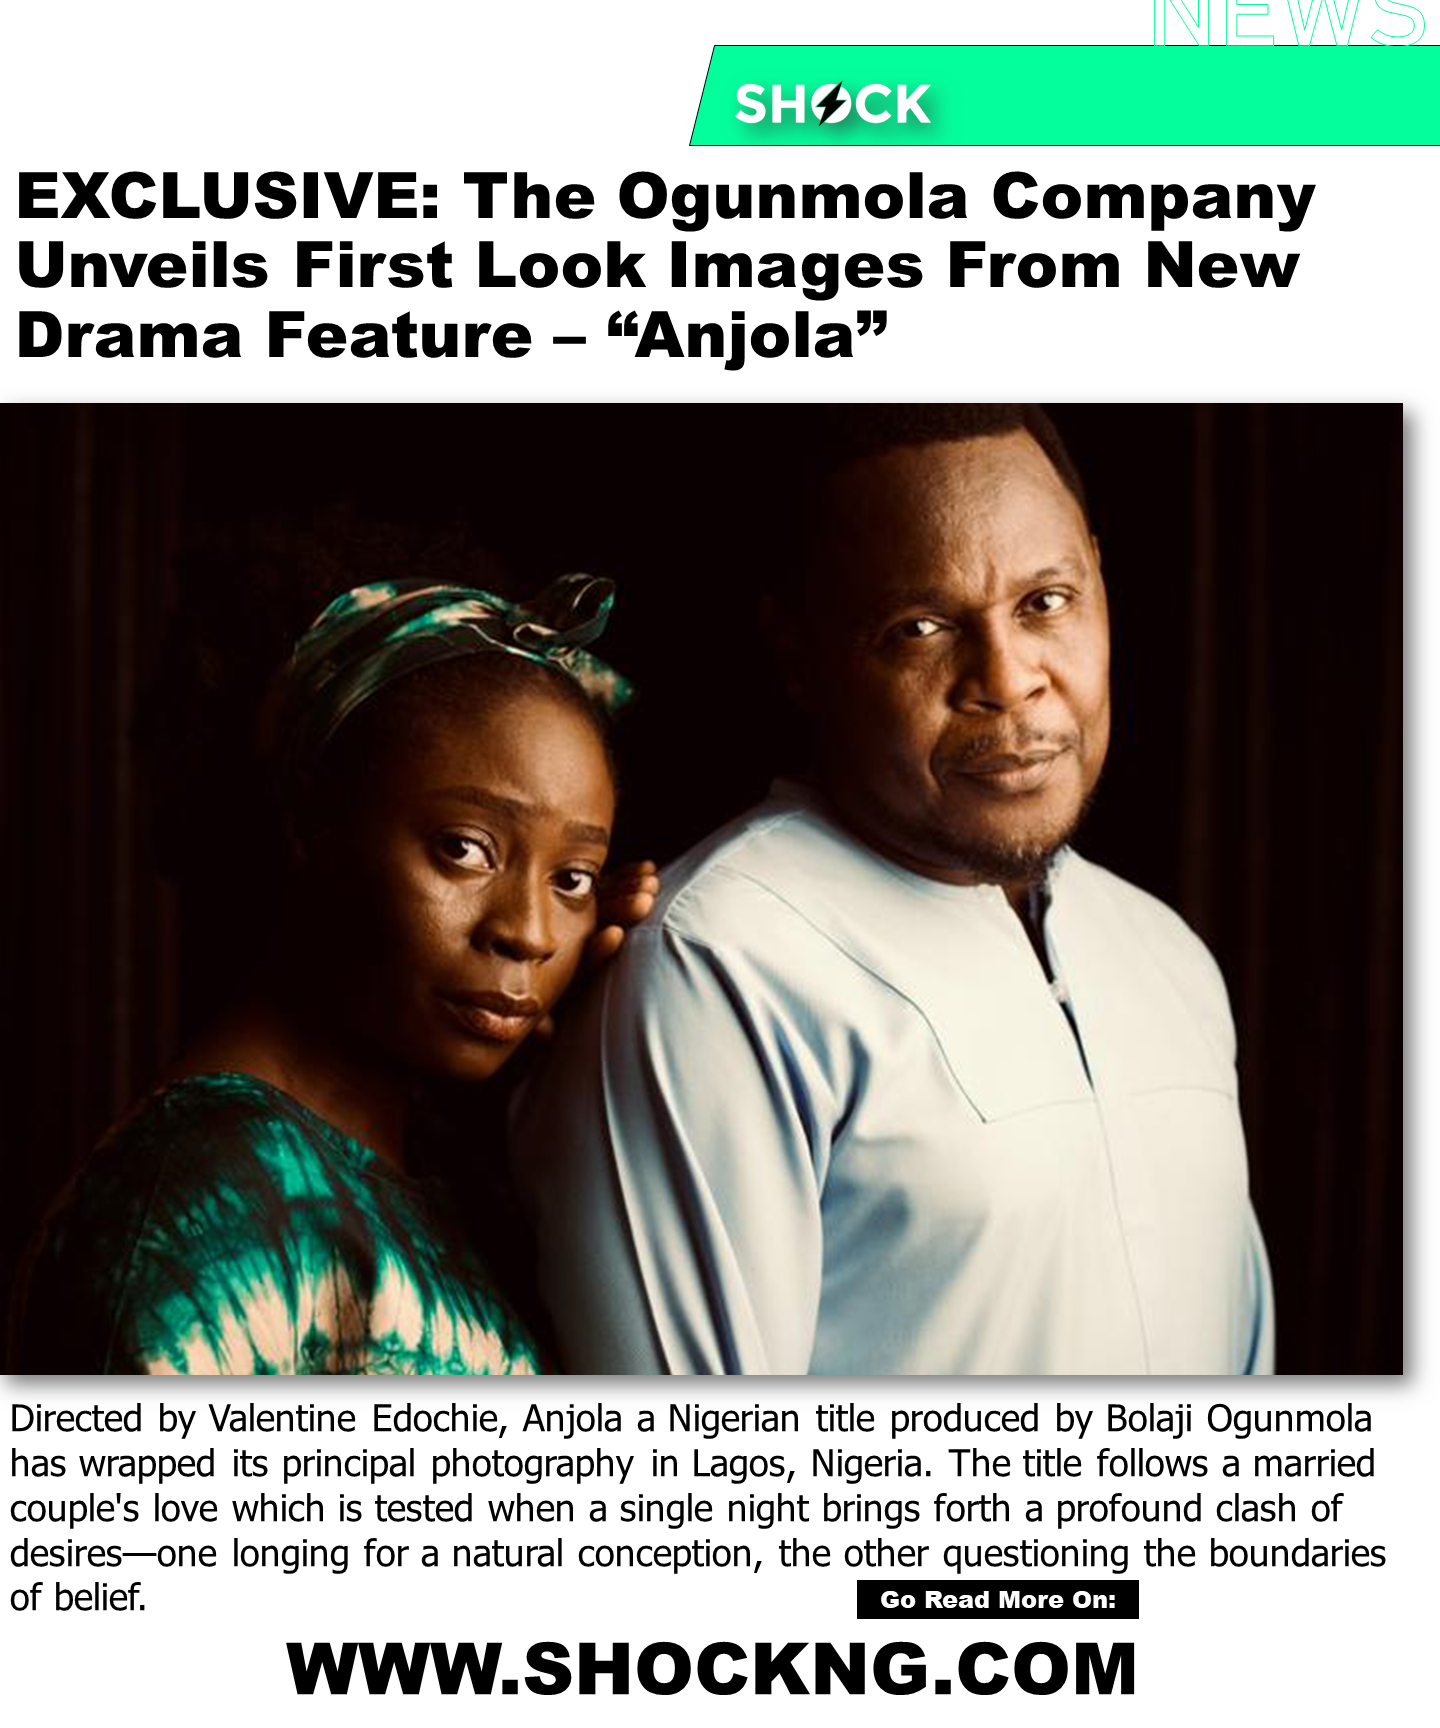 Anjola New - The Ogunmola Company Unveils First Look Images From New Drama Feature – “Anjola” (Exclusive)